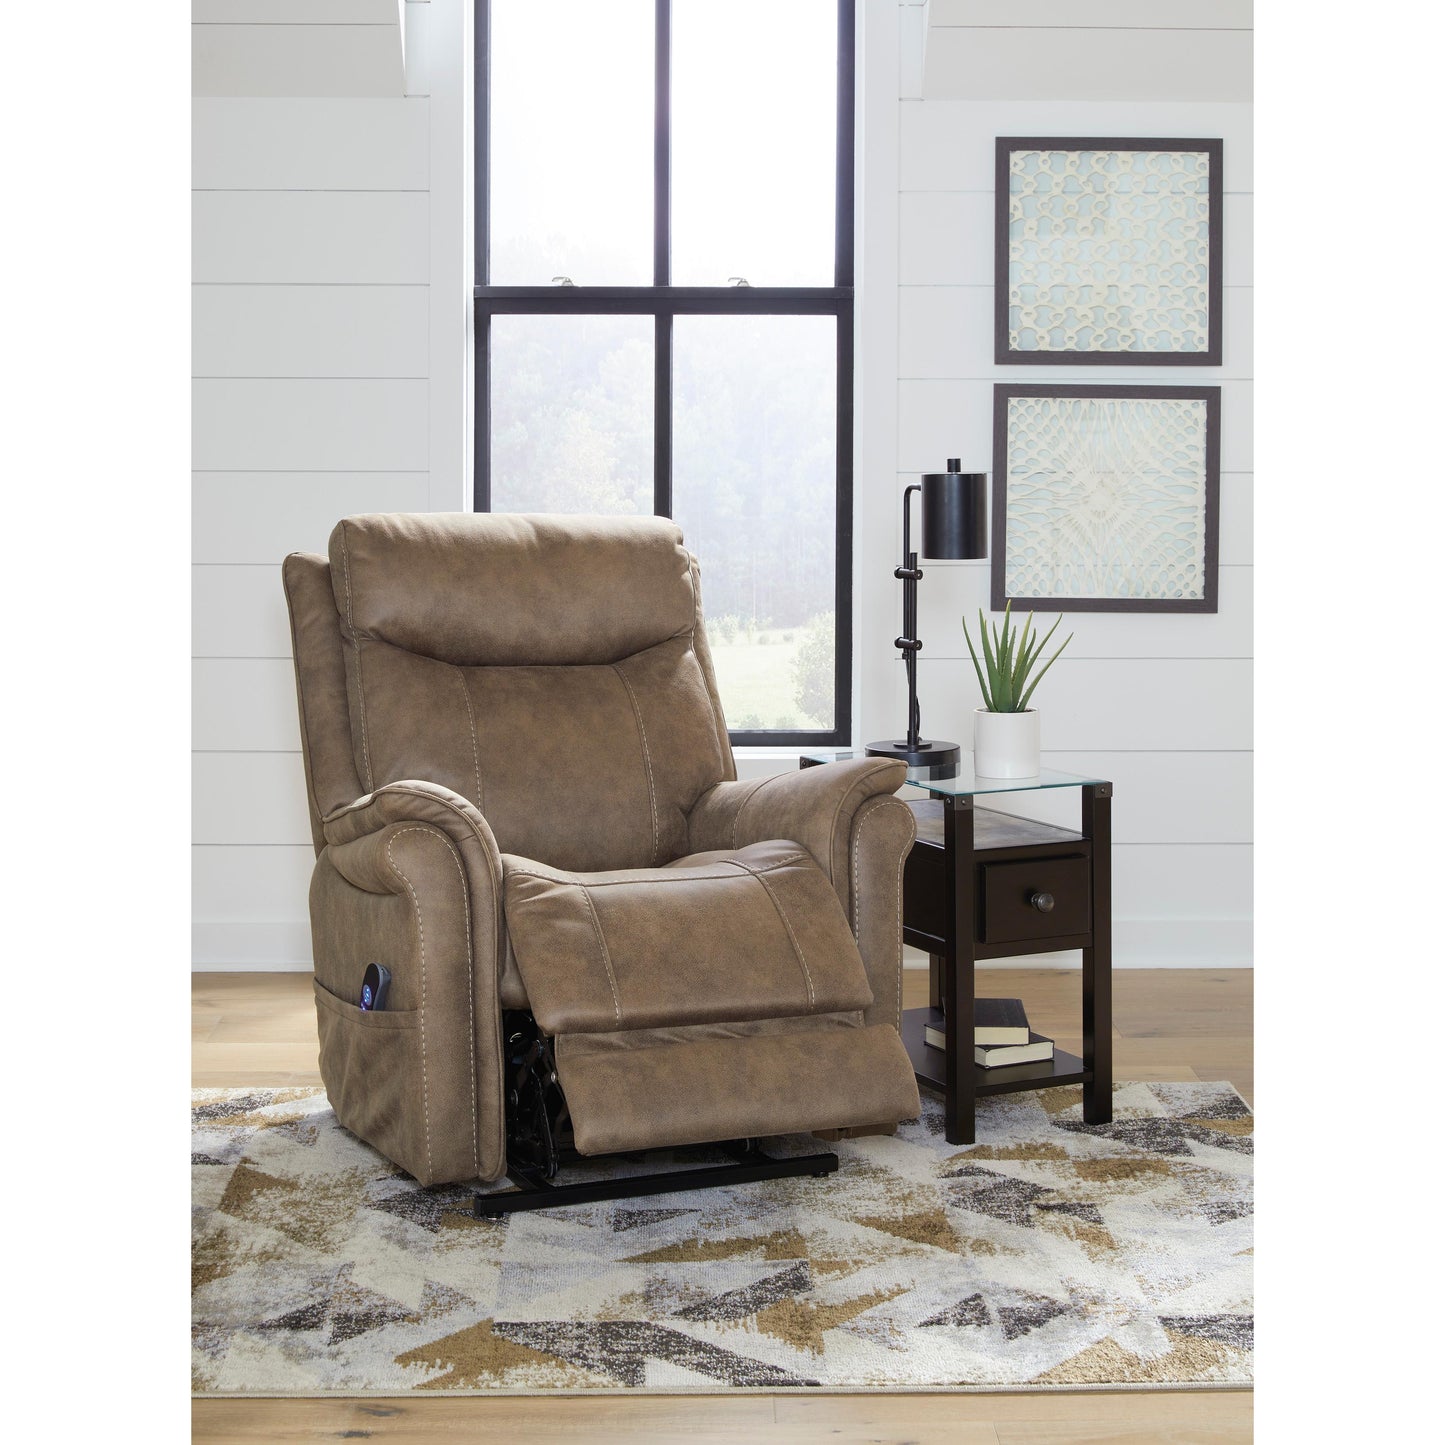 Signature Design by Ashley Lorreze Fabric Lift Chair with Heat and Massage 8530612 IMAGE 9